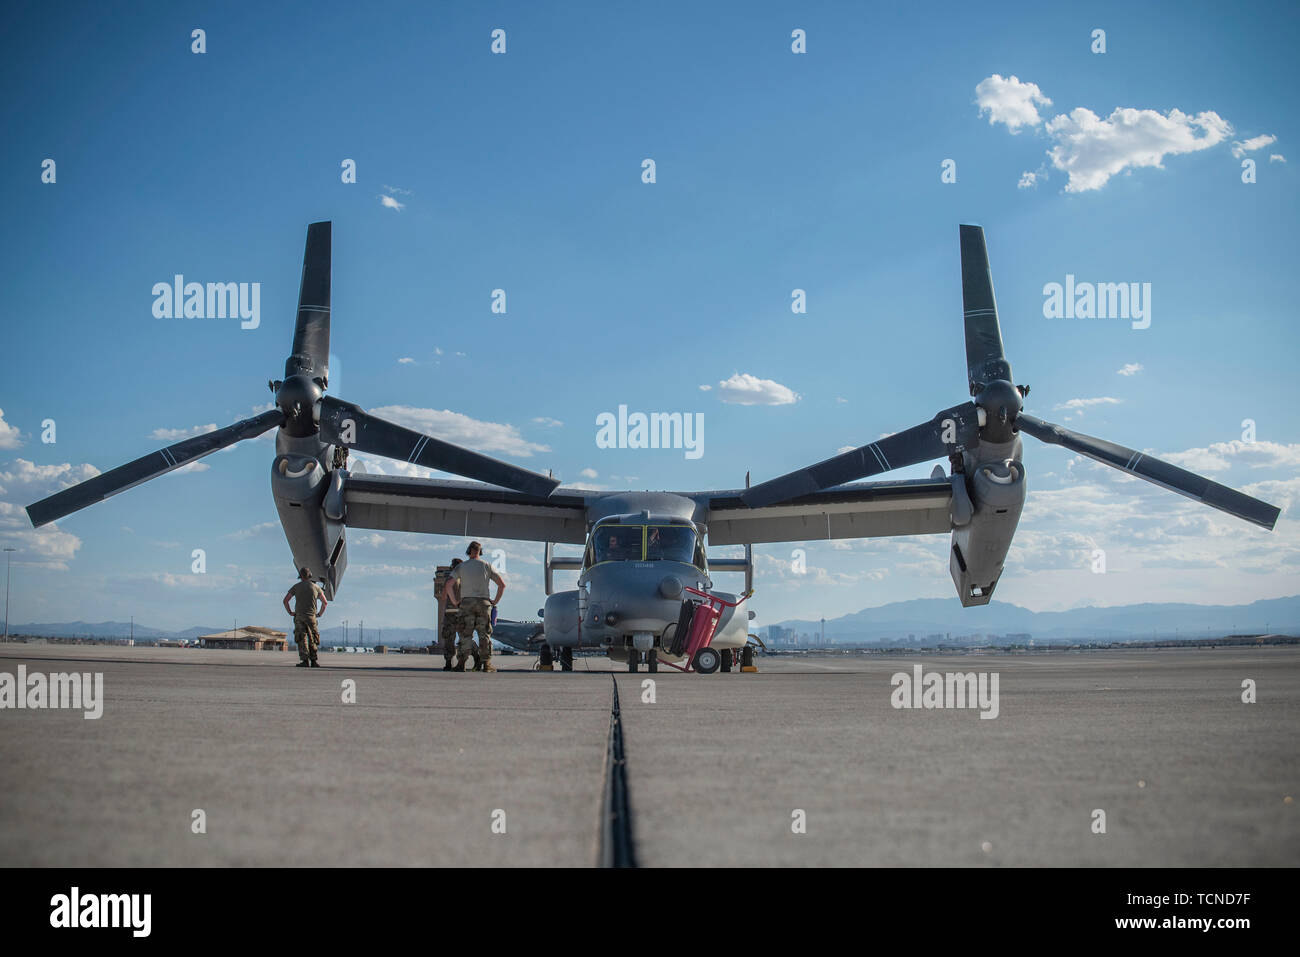 Maintenance and pilots prepare to deplane a V-22 Osprey, June 5, 2019, at Nellis Air Force Base, Nev. Nellis AFB is frequently visited by a multitude of different units and aircraft as it is the home of U.S. Air Force Weapons School, as well as Green Flag and Red Flag exercises. (U.S. Air Force photo by Airman 1st Class Jeremy Wentworth) Stock Photo